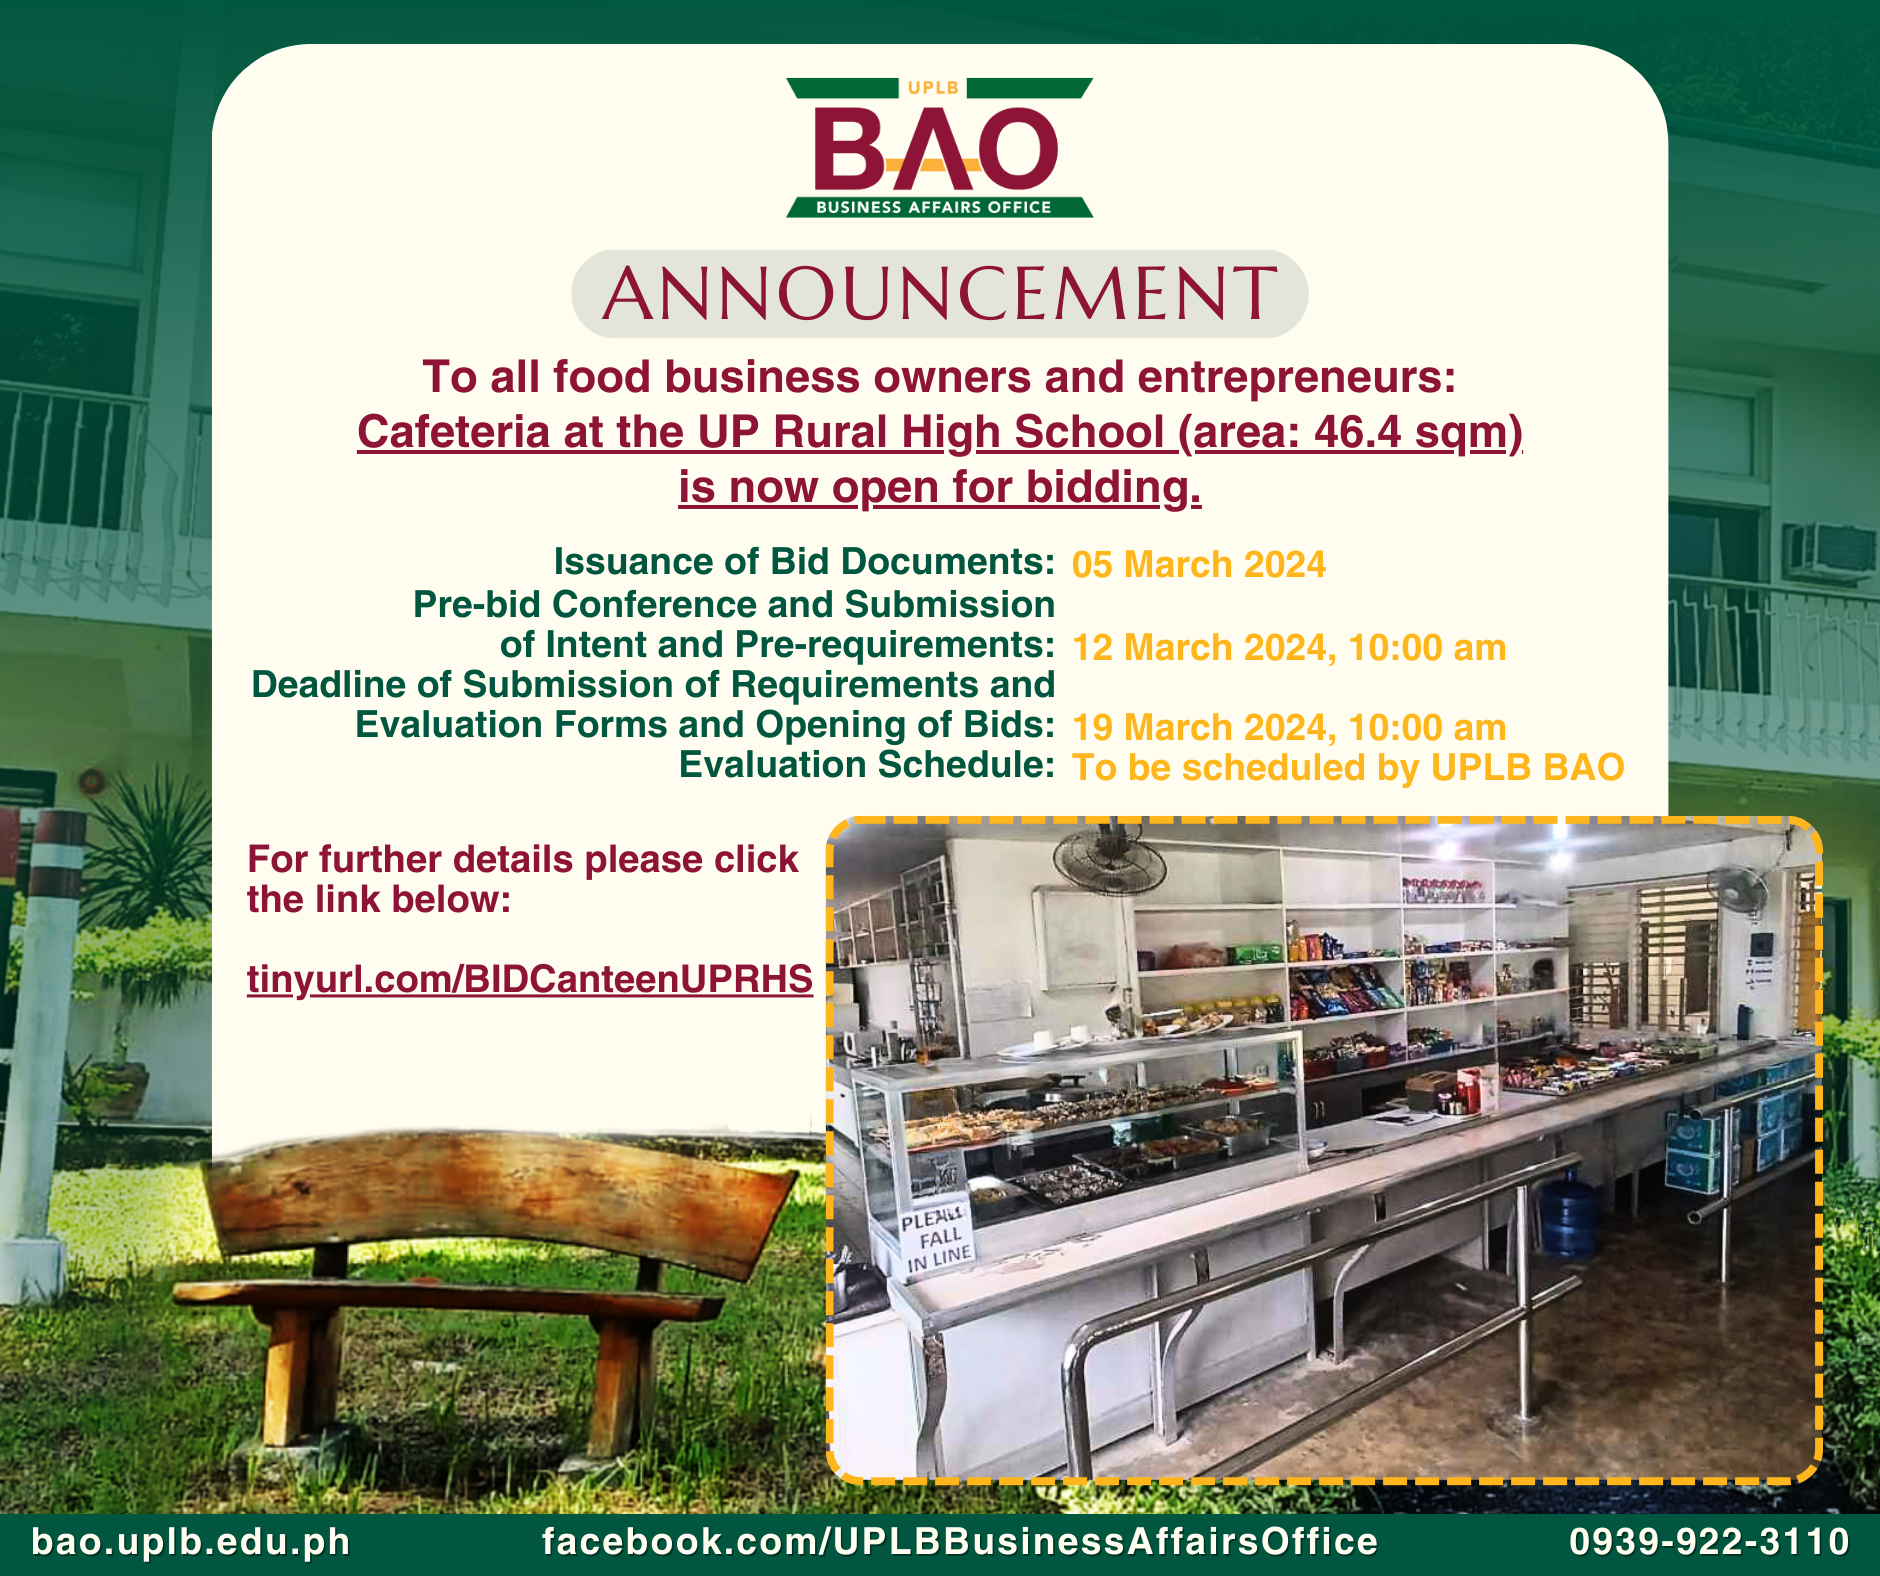 INVITATION TO BID: Available Space – Cafeteria at the UP Rural High School (UPRHS)